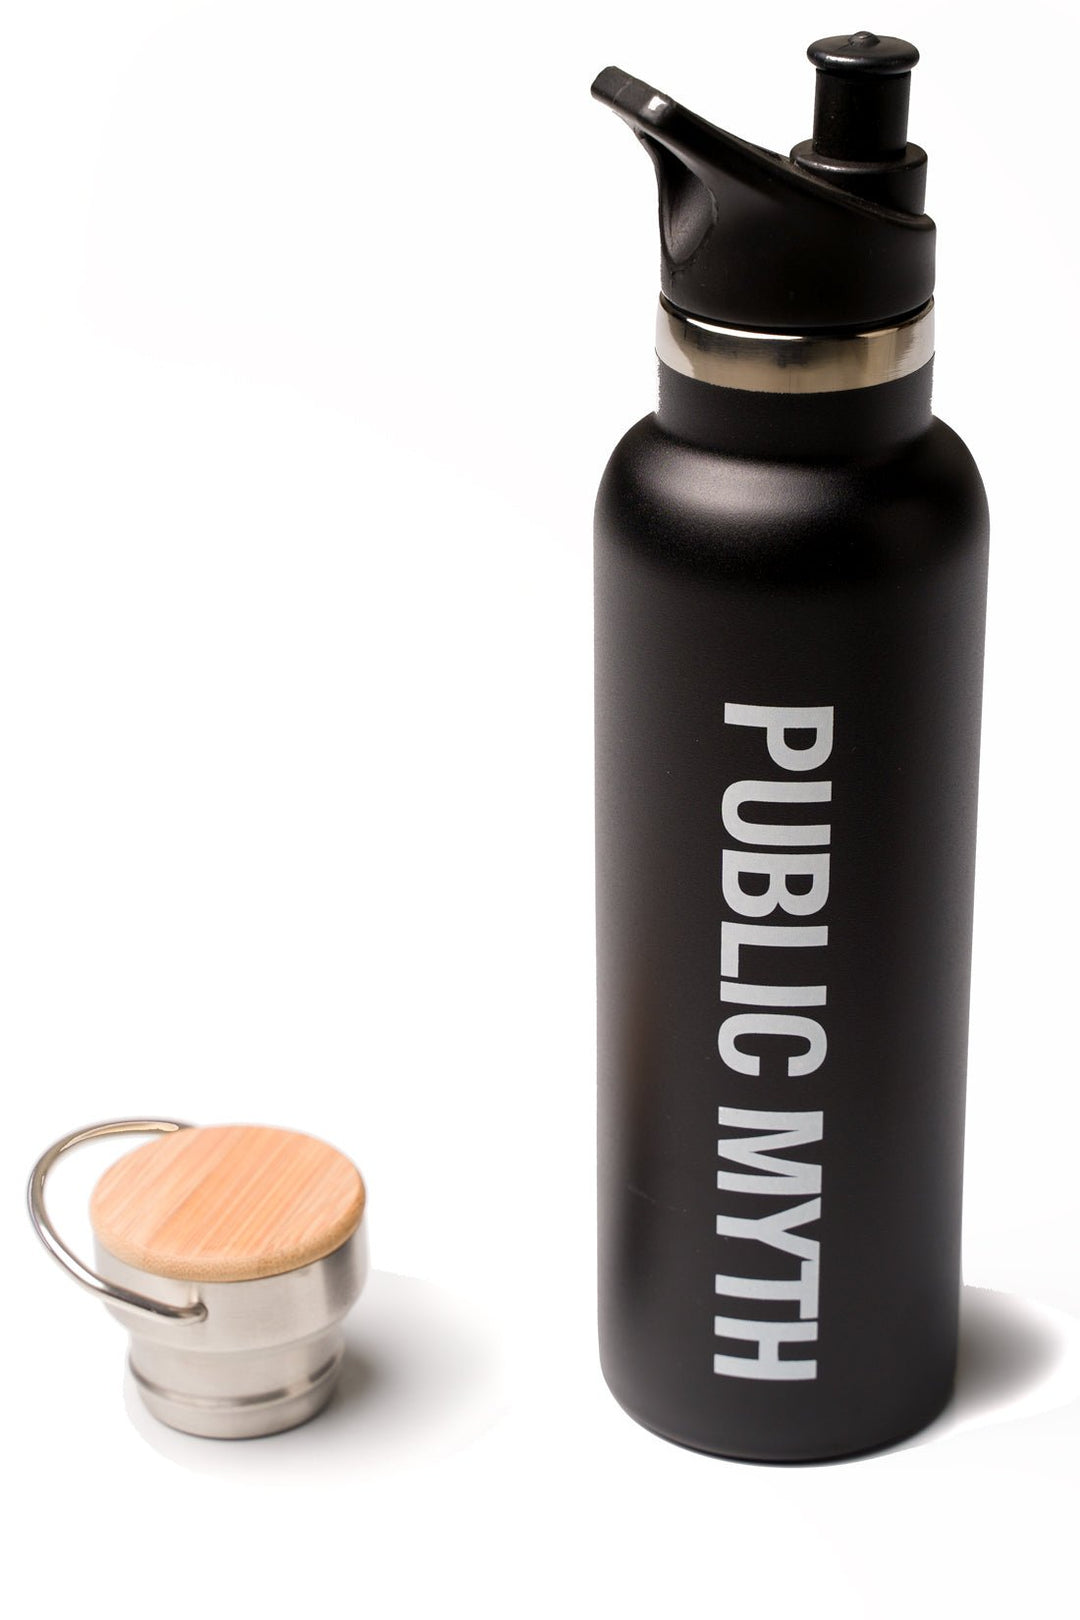 Public Myth stainless insulated steel water bottle with a bamboo top